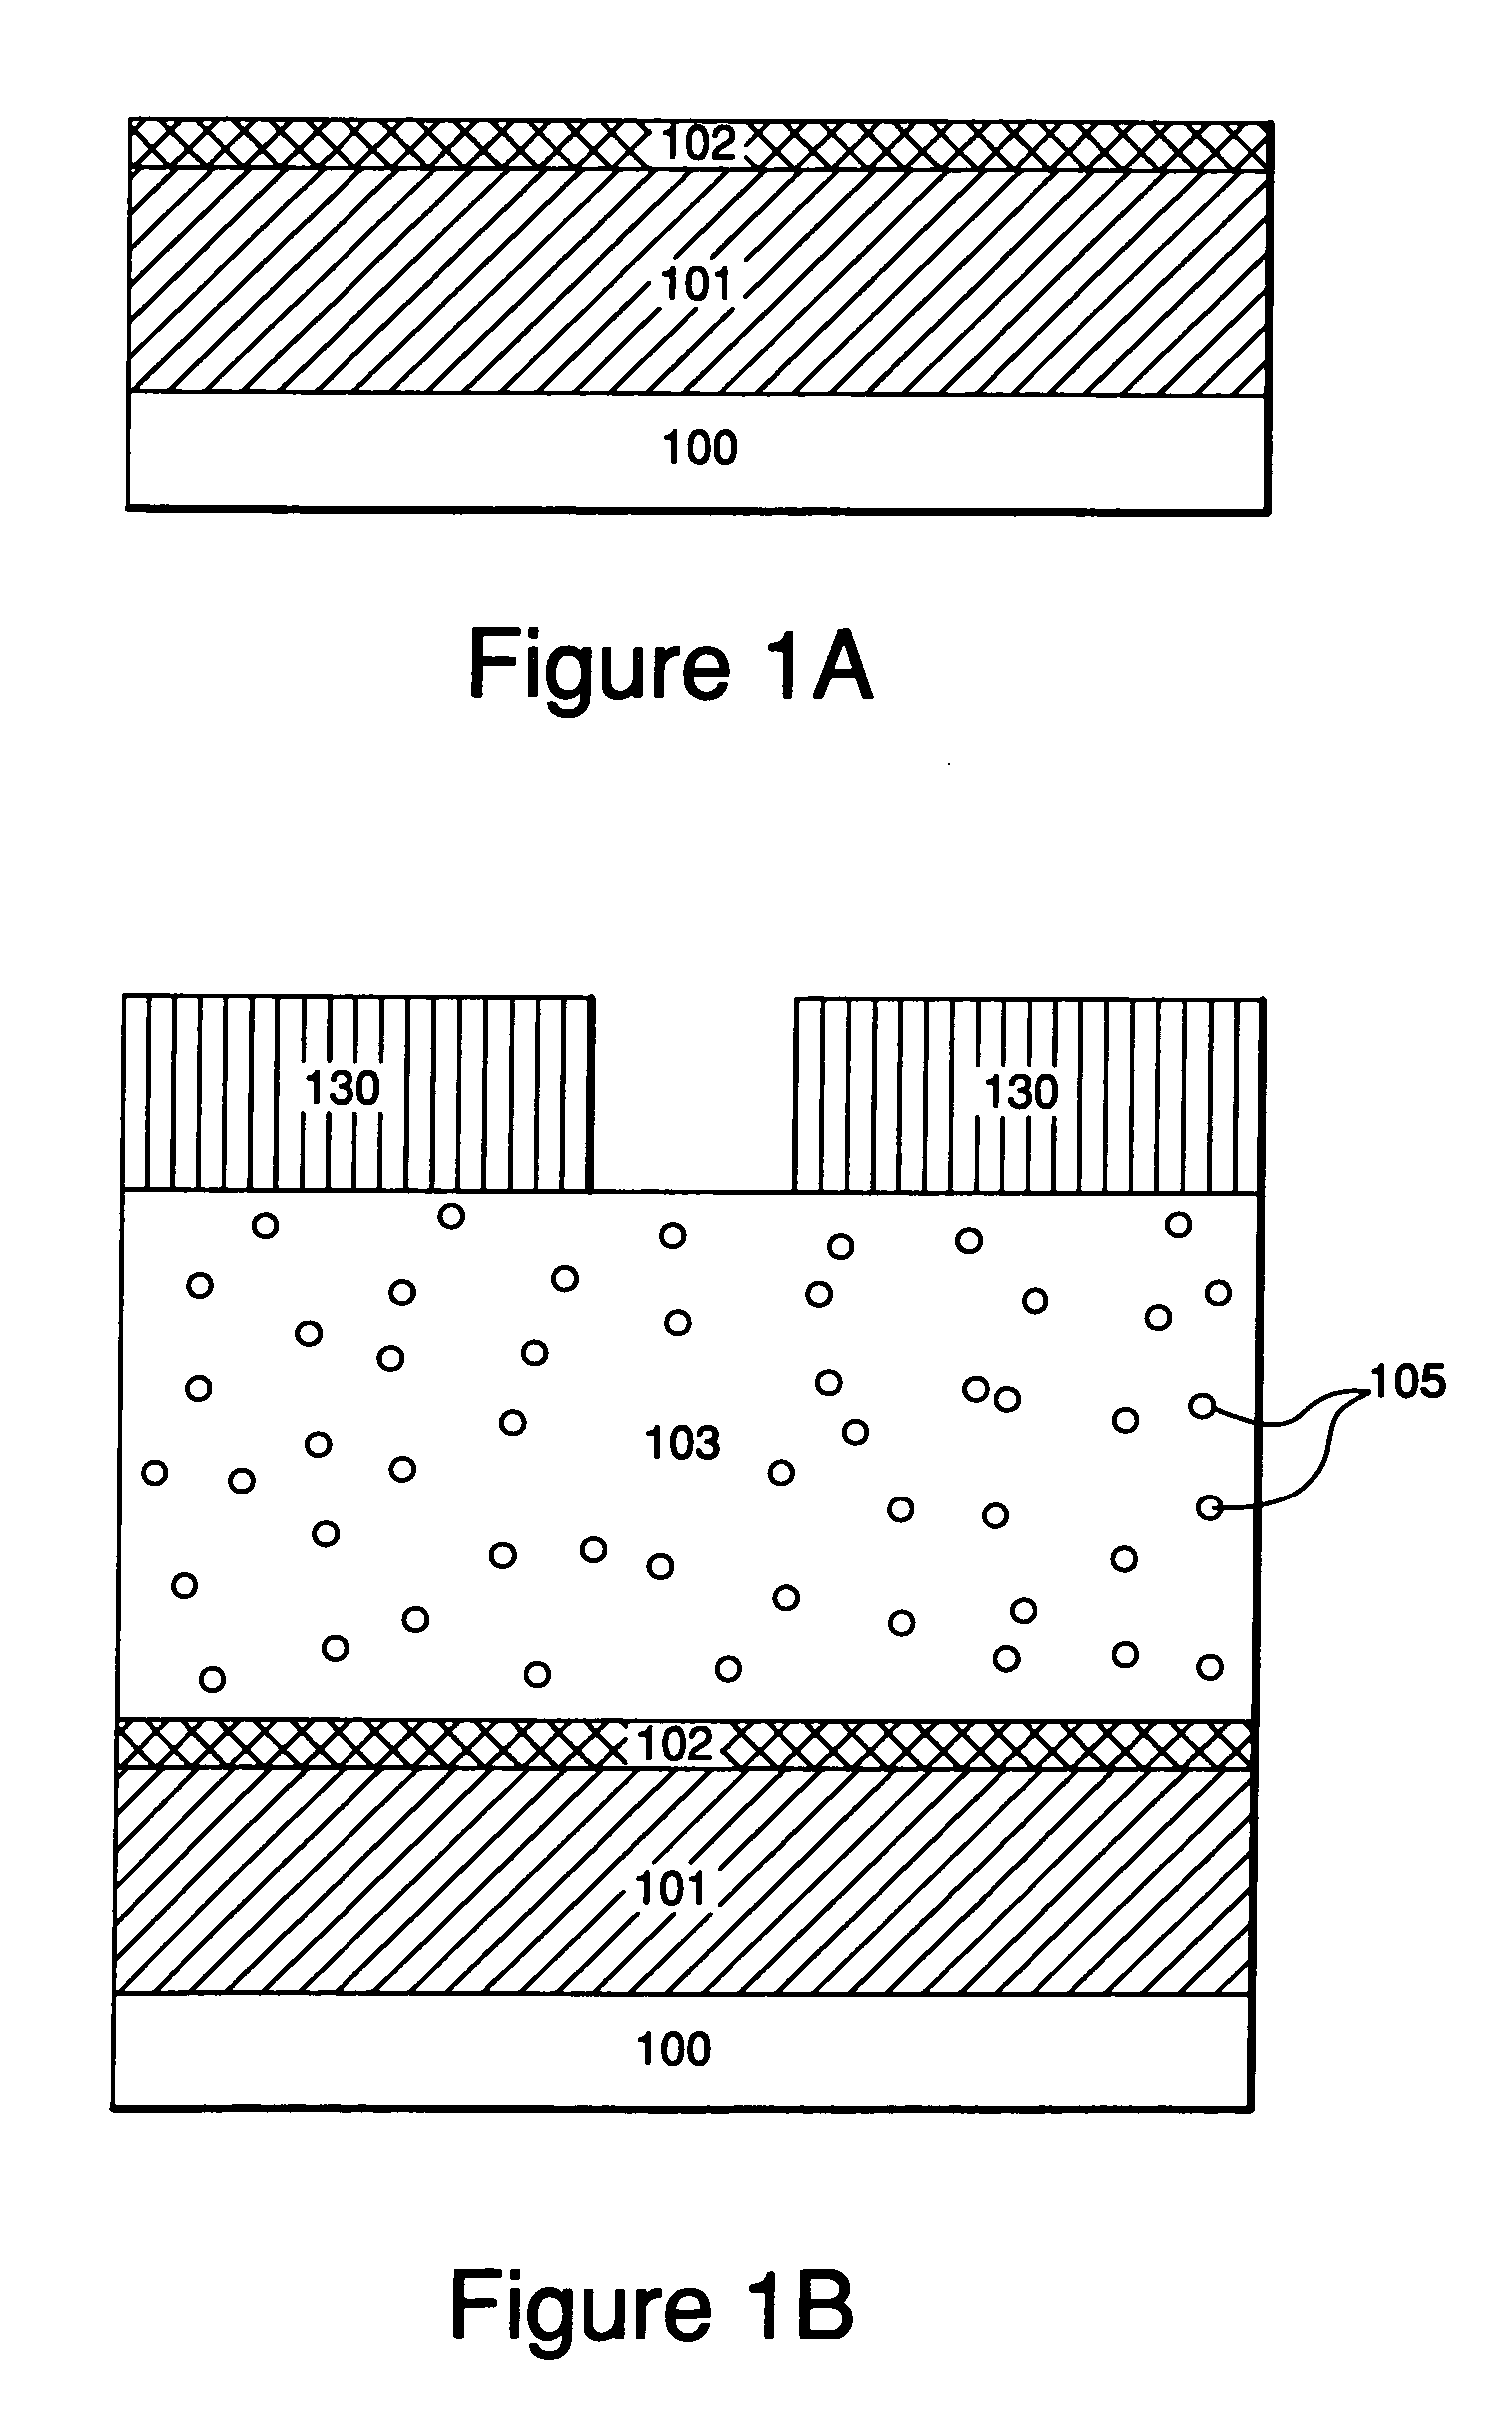 Method for defining a feature on a substrate